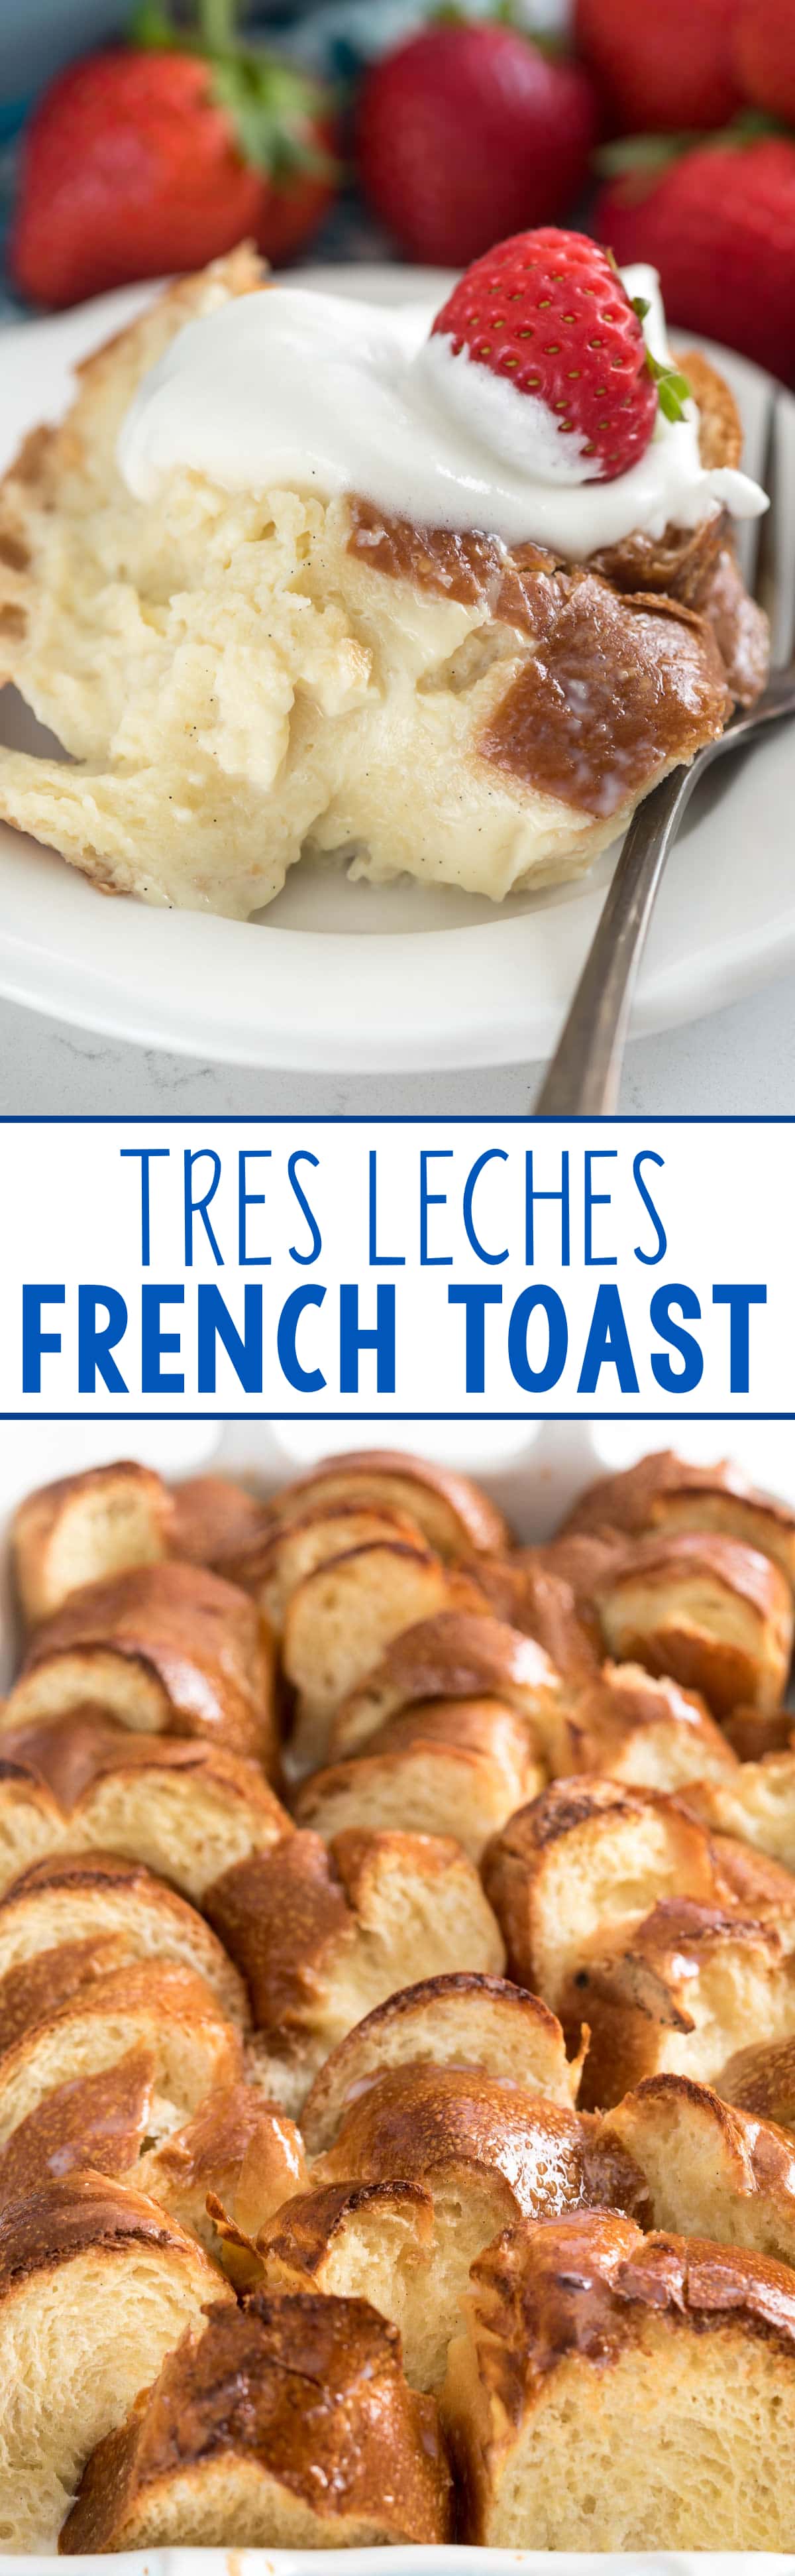 Tres Leches French Toast Casserole - this easy breakfast or brunch recipe coats Challah bread with a tres leeches mixture before and after baking!